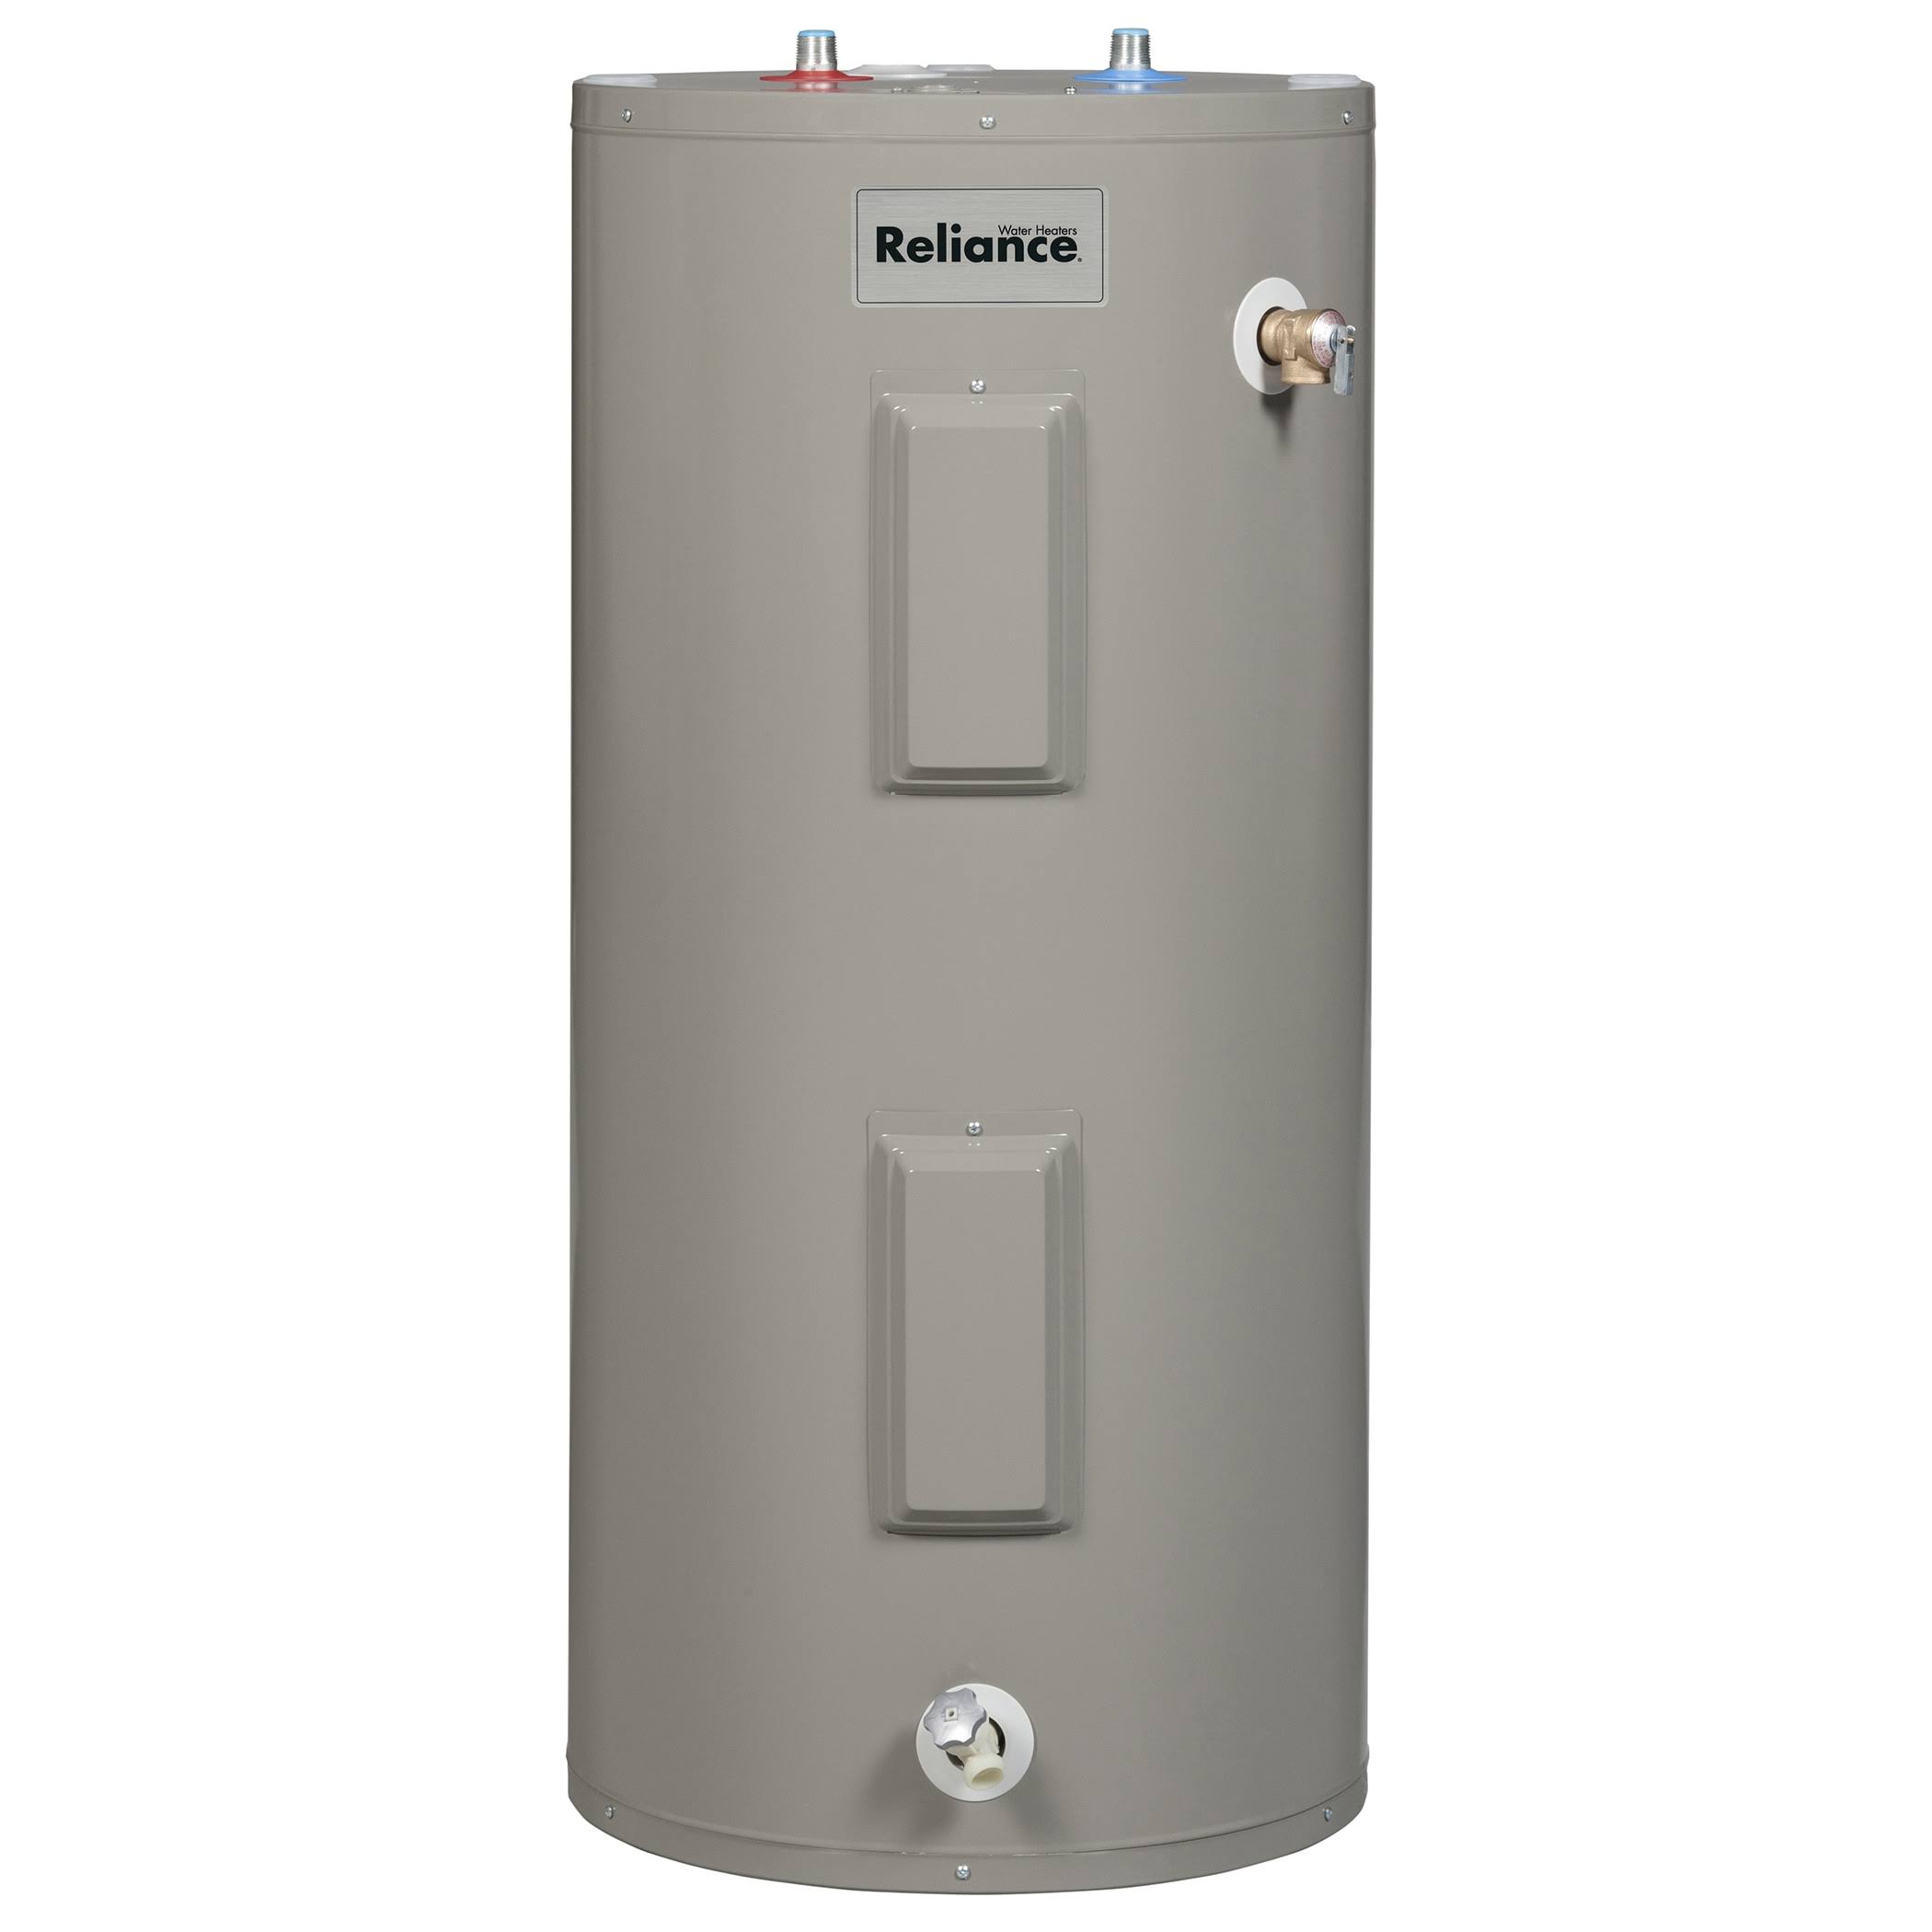 Reliance 650eors100 Electric Water Heater - 50 Gallon